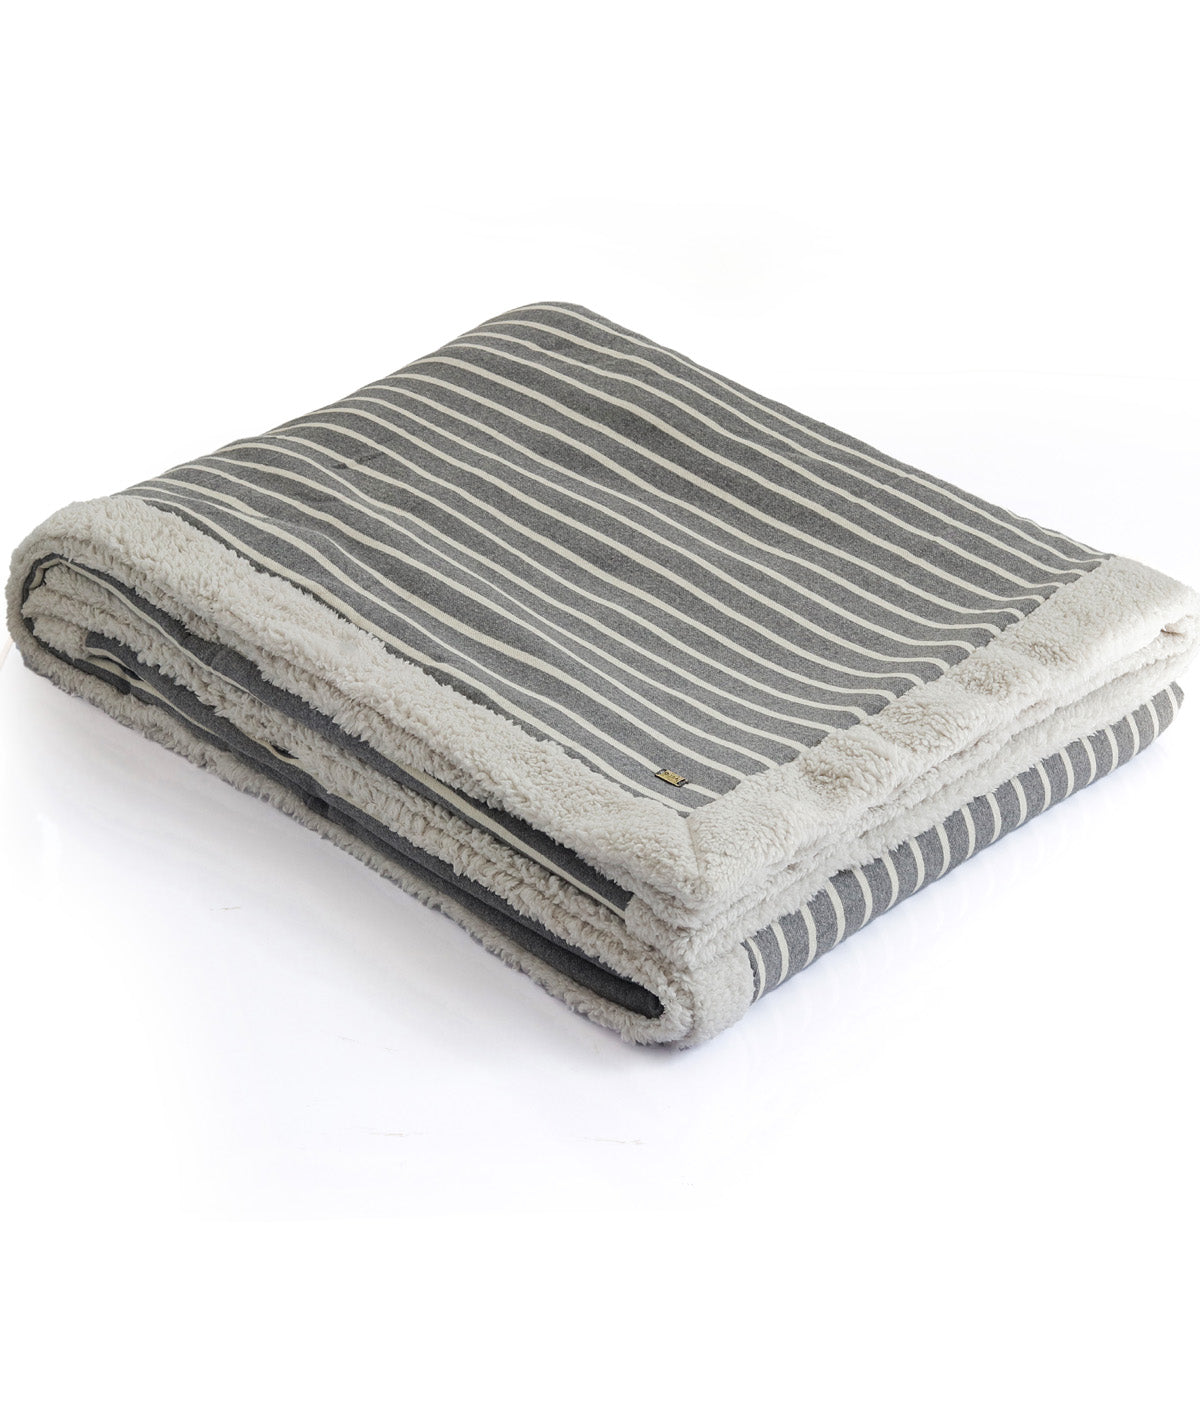 Stripe - Double Bed Front Cotton Knitted with Sherpa Back Blanket with Ivory & Dark Grey